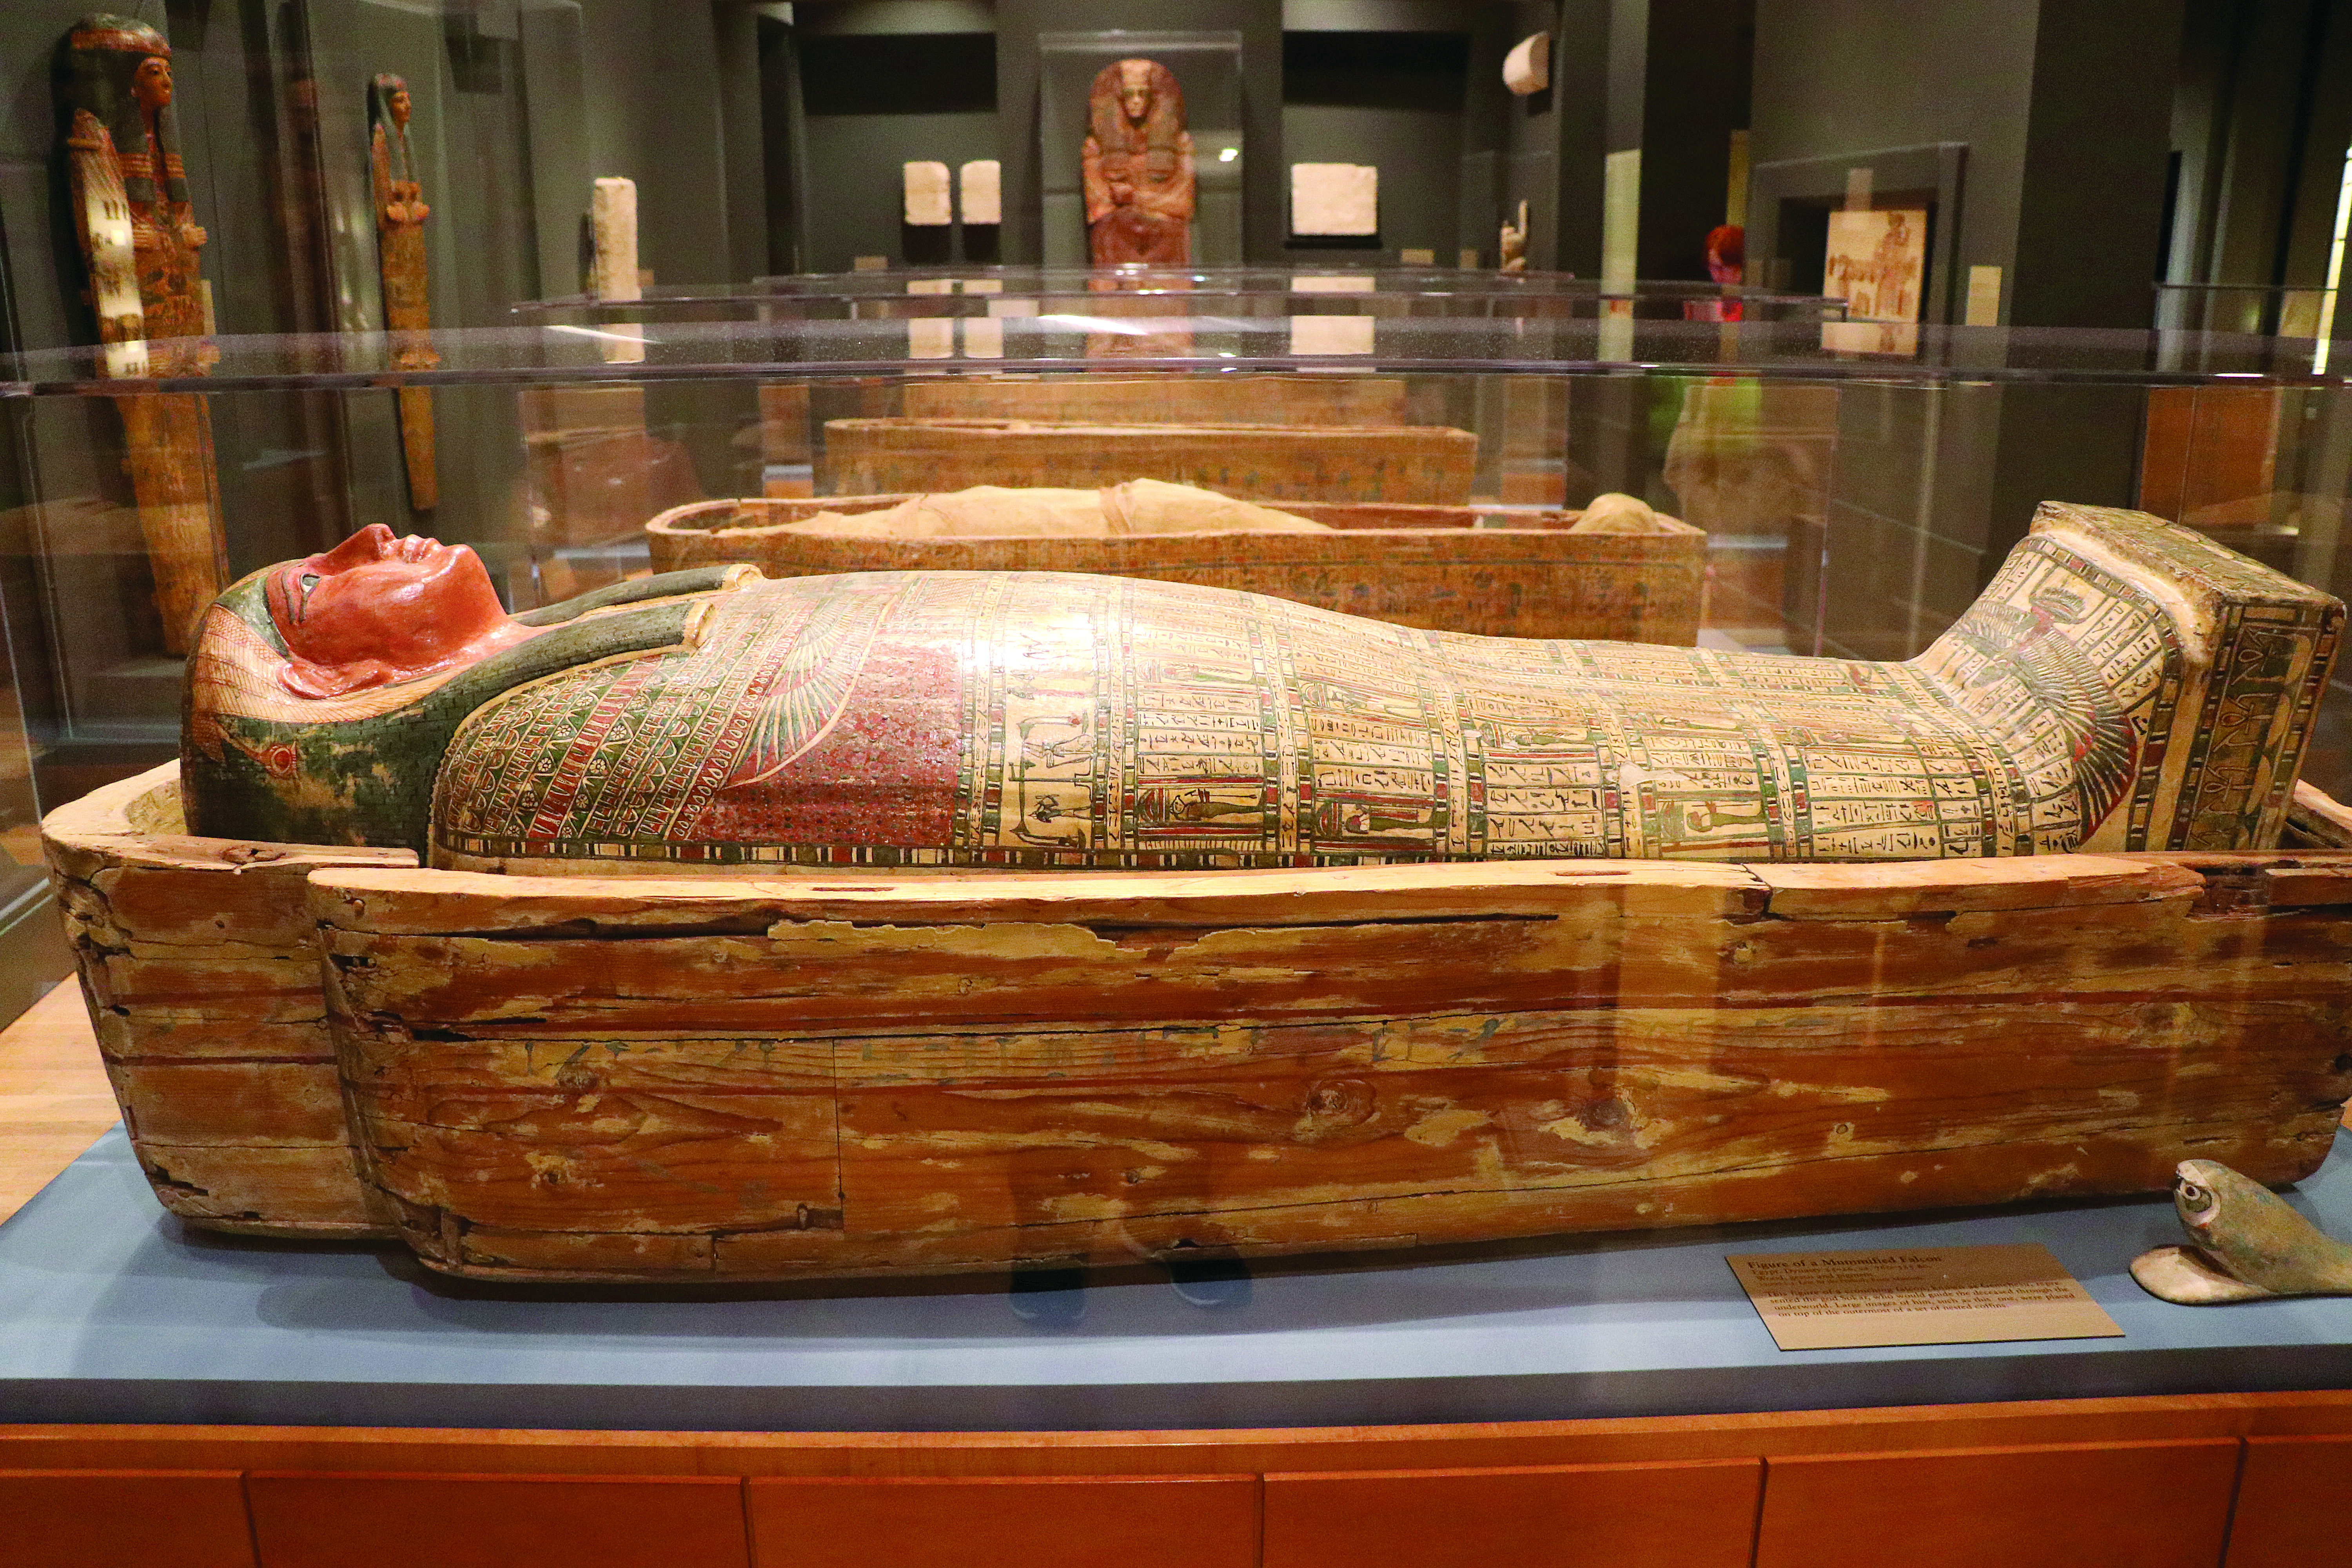 To see or not to see: The ongoing debate of displaying mummies at the Carlos Museum